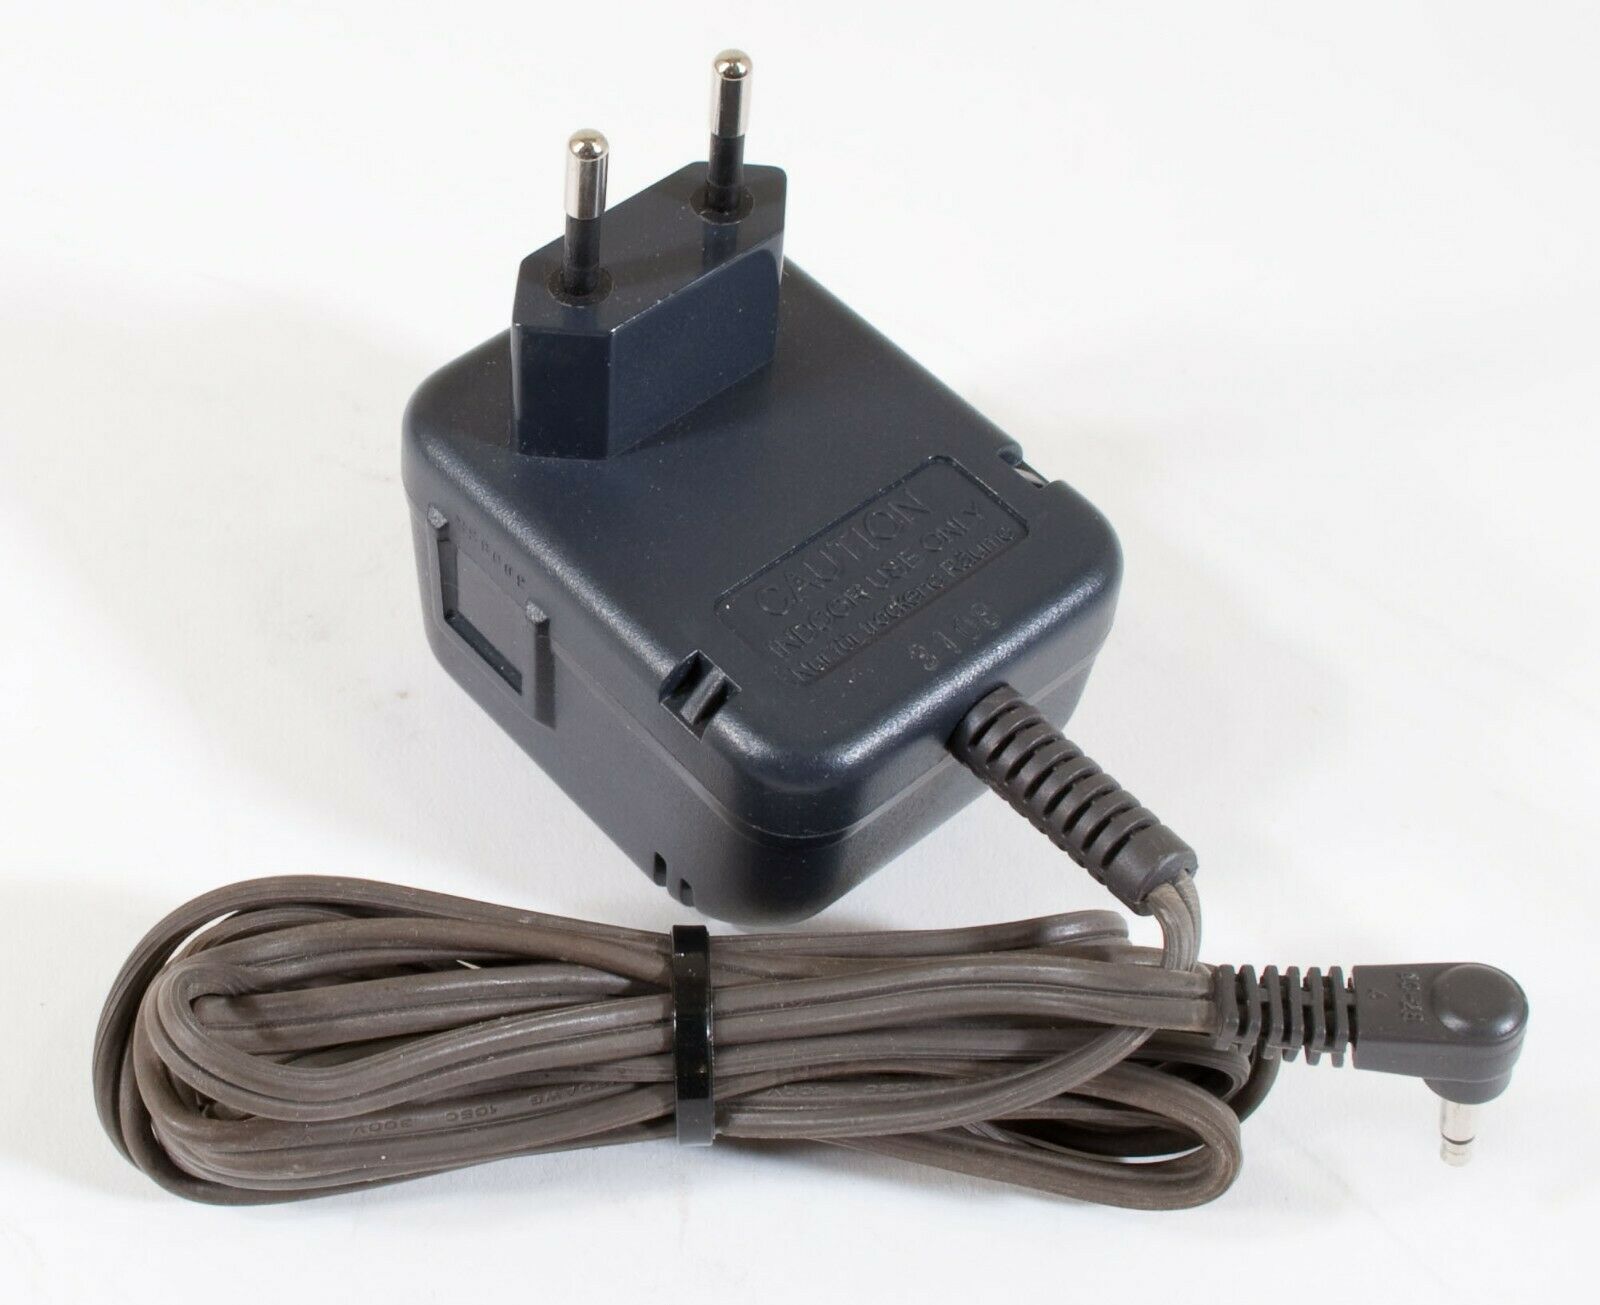 BaByliss 41VD030100 AC Adapter 3V 1000mA Original Power Supply Europlug Output Current: 1000 mA Compatible Brand: For